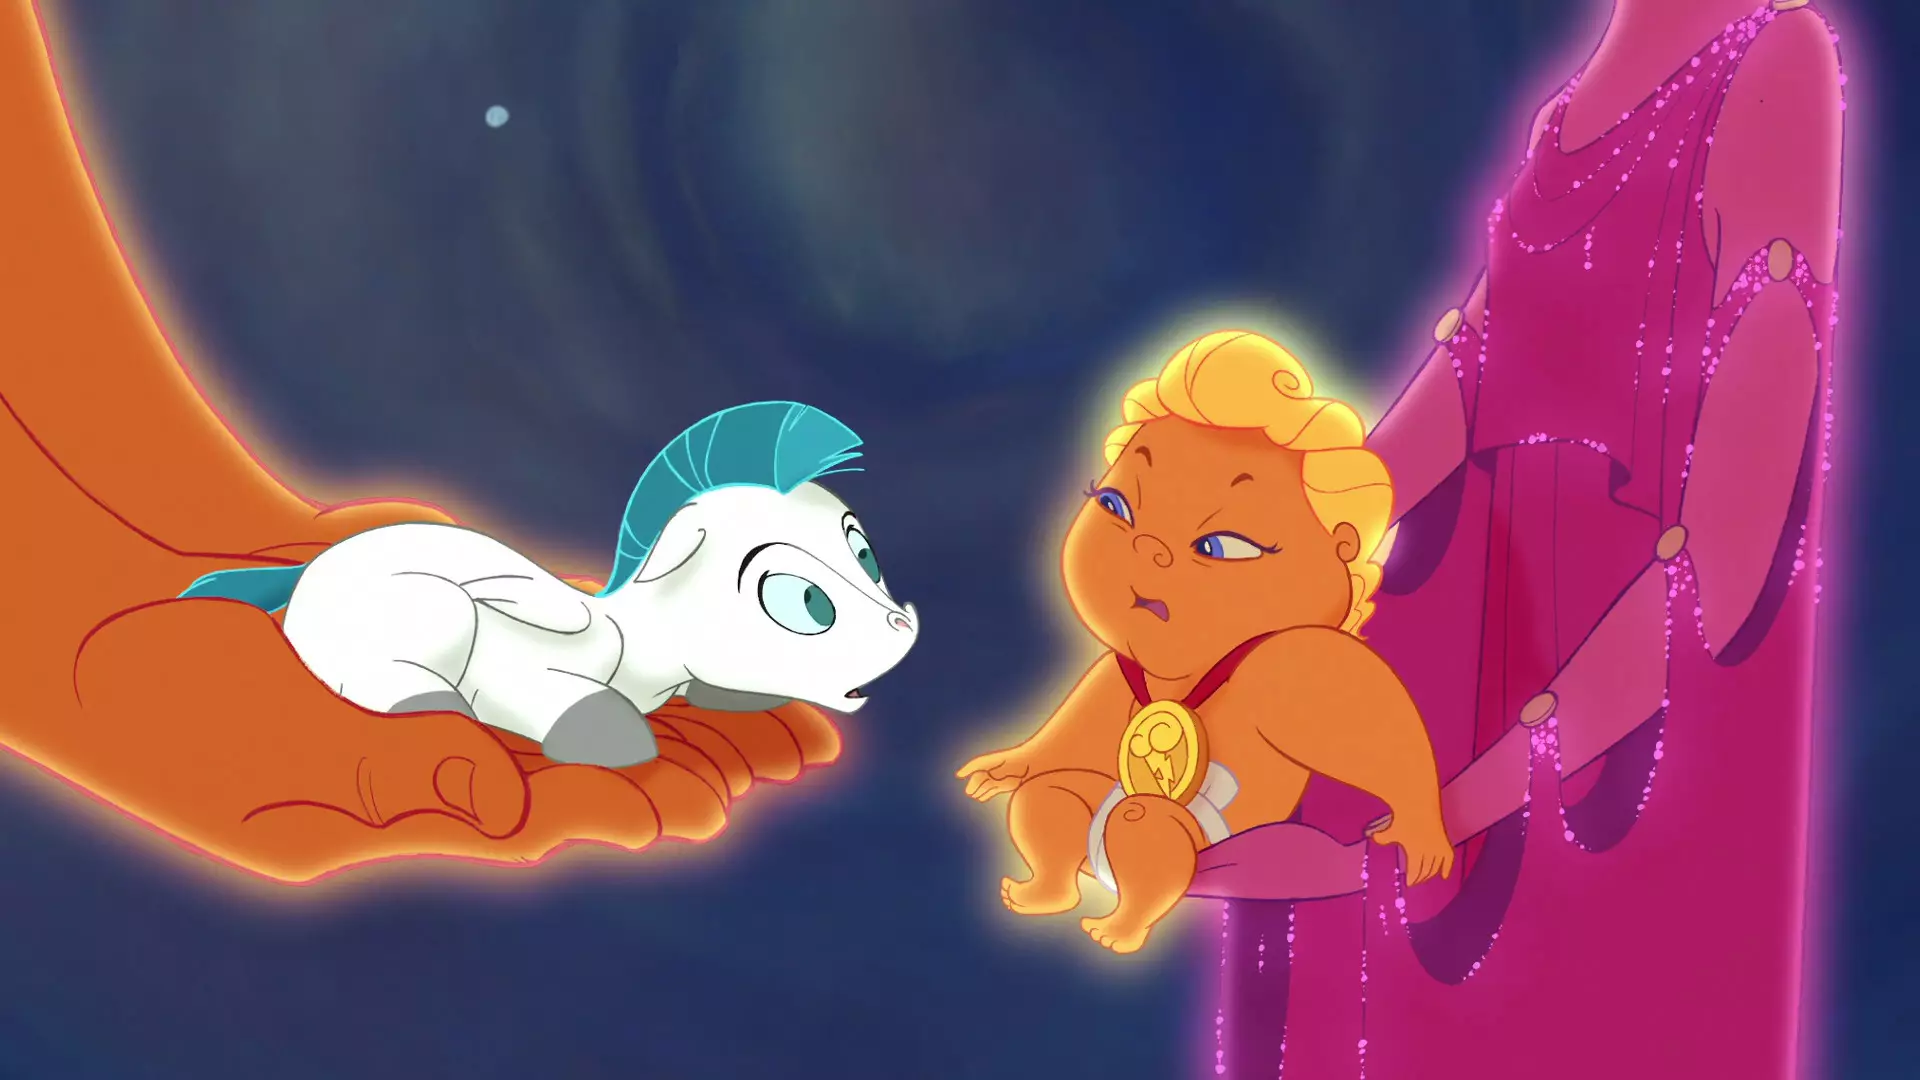 The silhouette of baby Pegasus led to the unfortunate shape. (